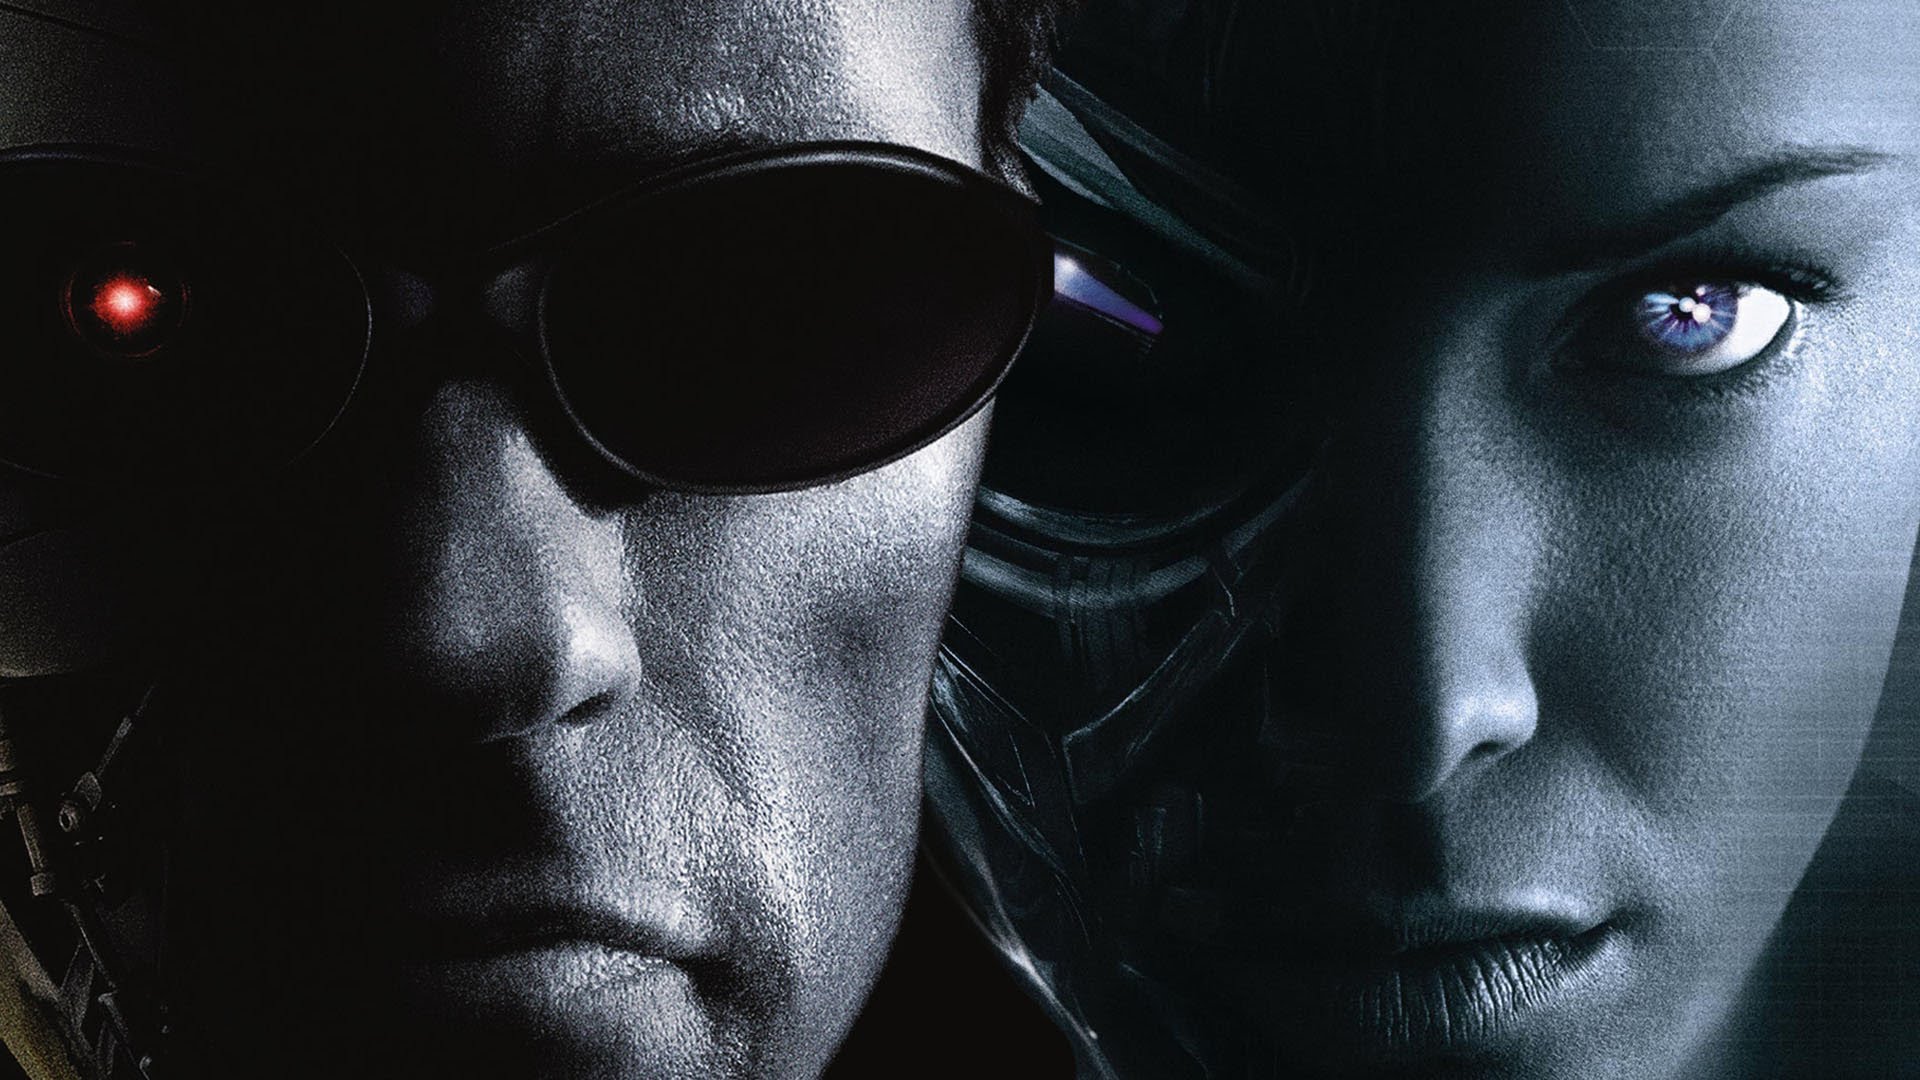 Terminator 3: Rise Of The Machines HD wallpapers, Desktop wallpaper - most viewed